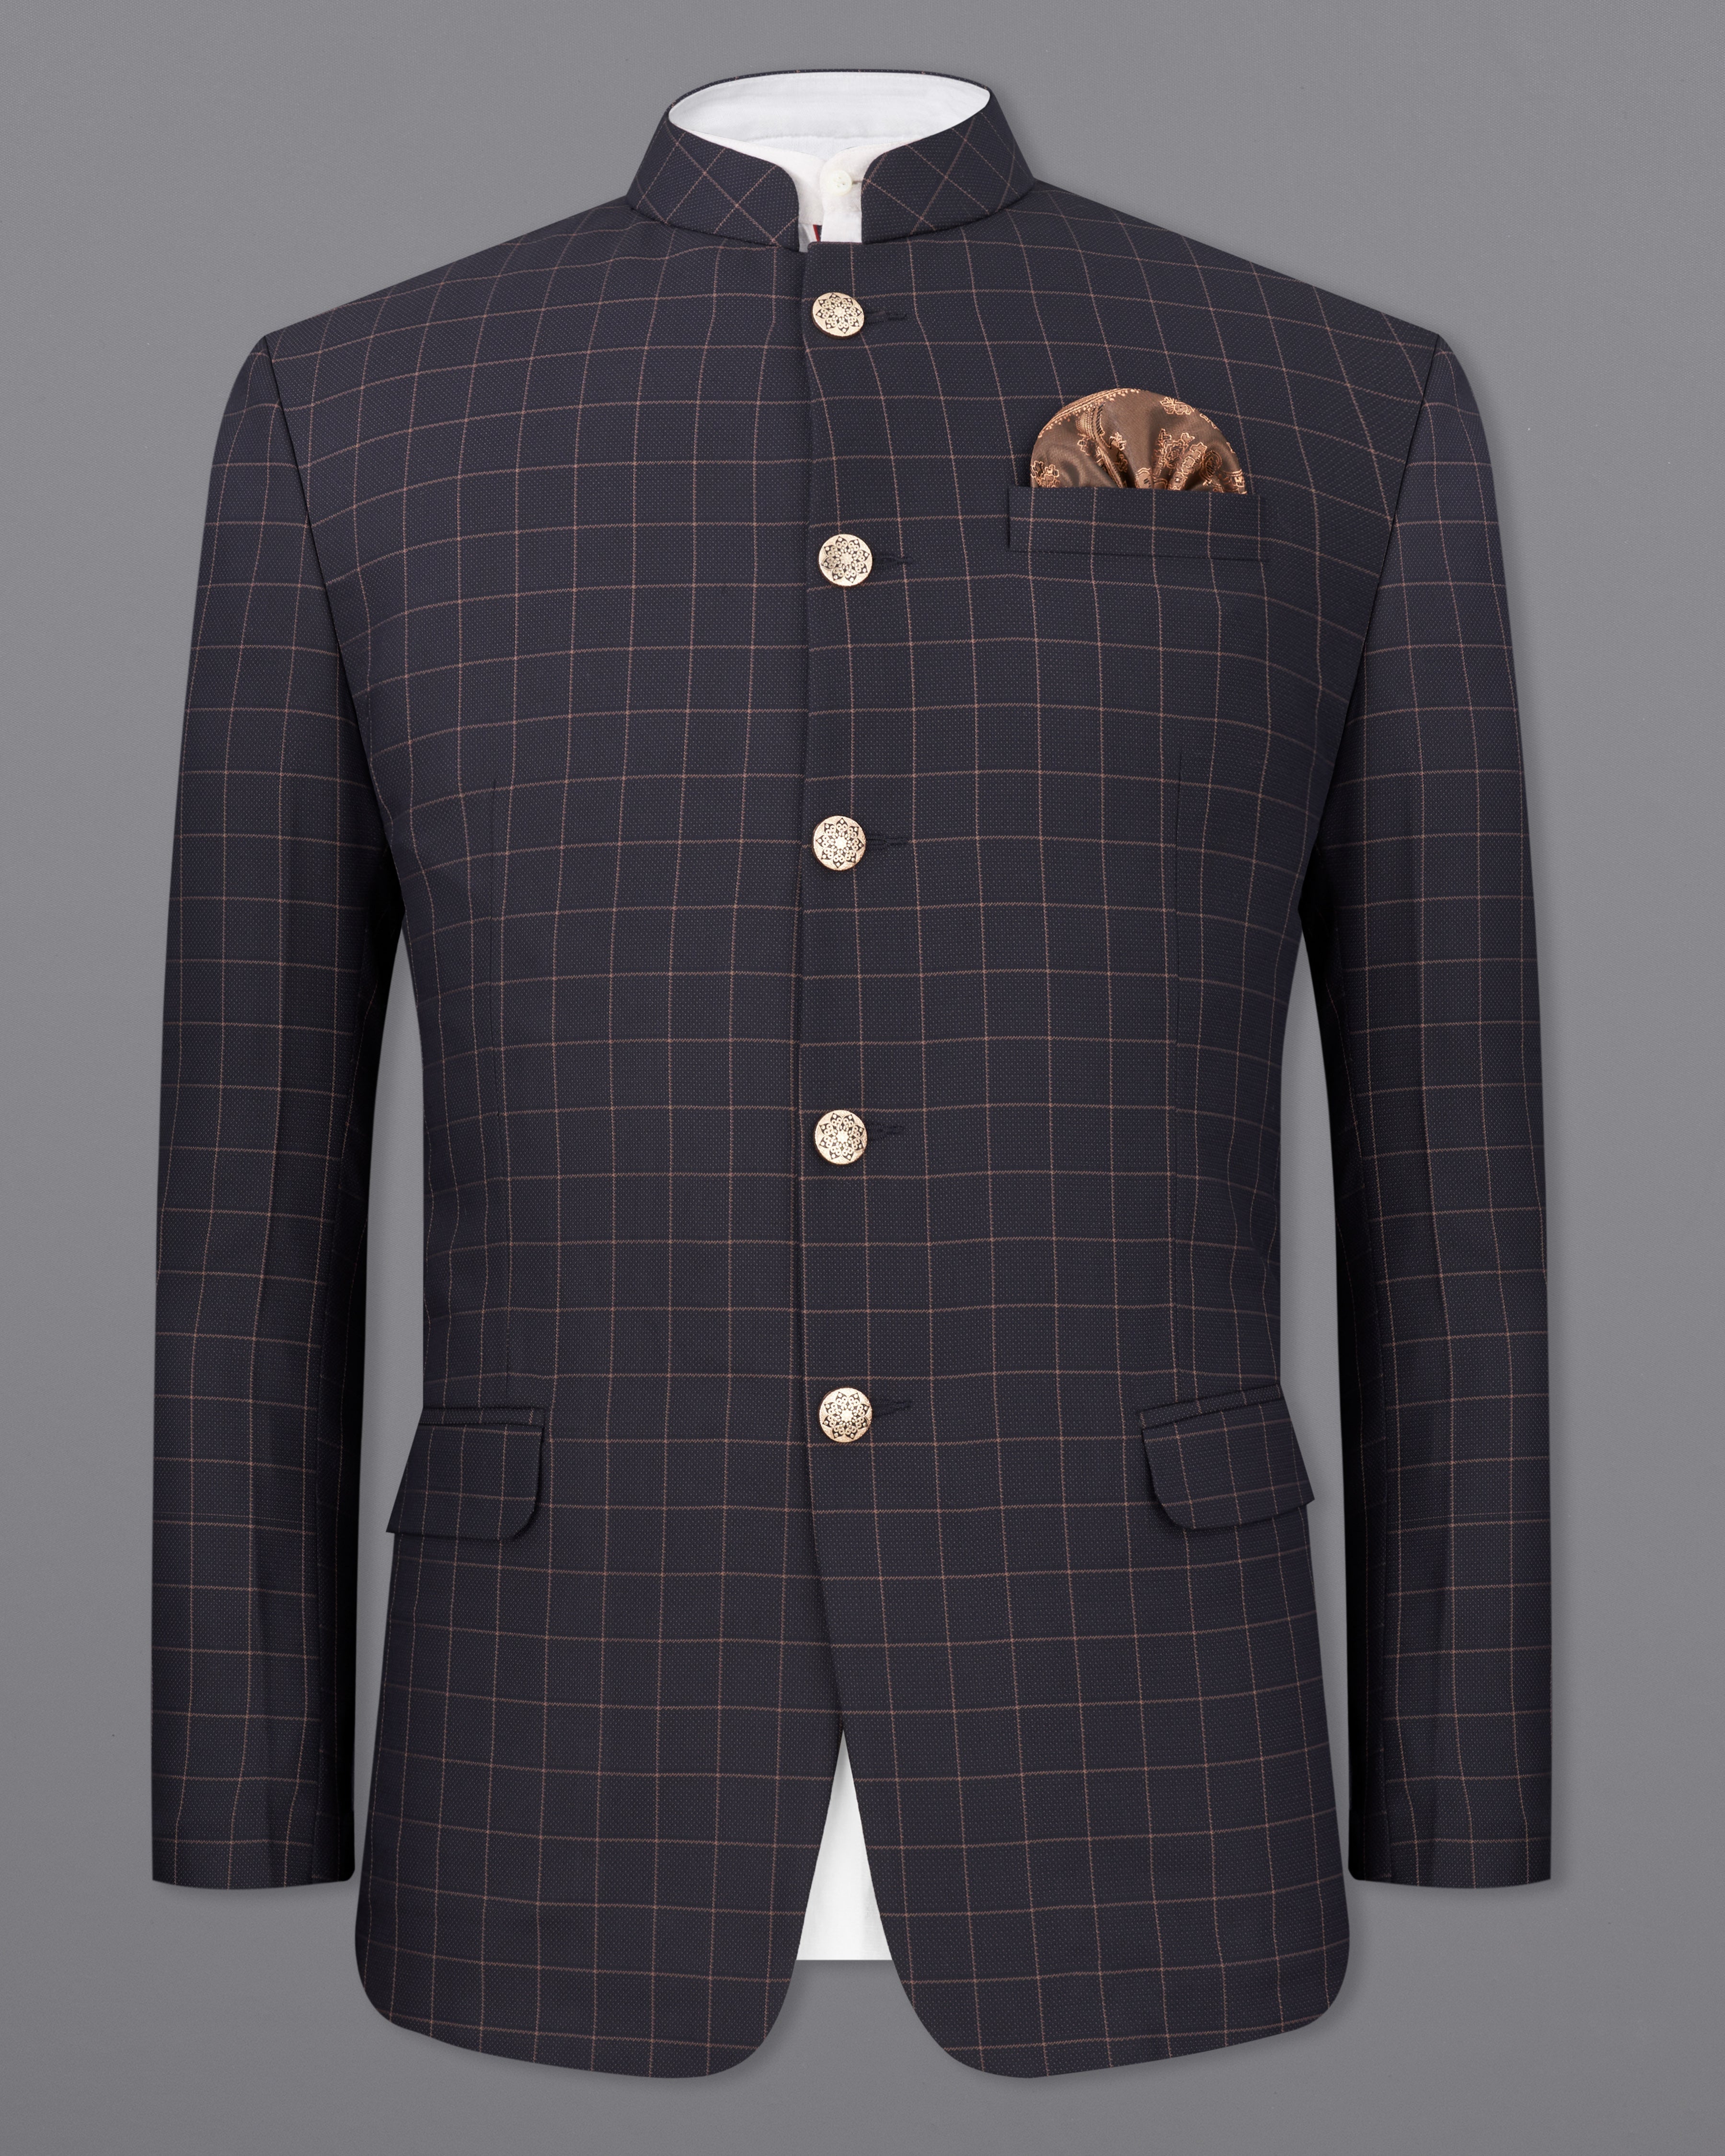 Shop Blazers For Men in India, Casual And Formal Blazers For Your